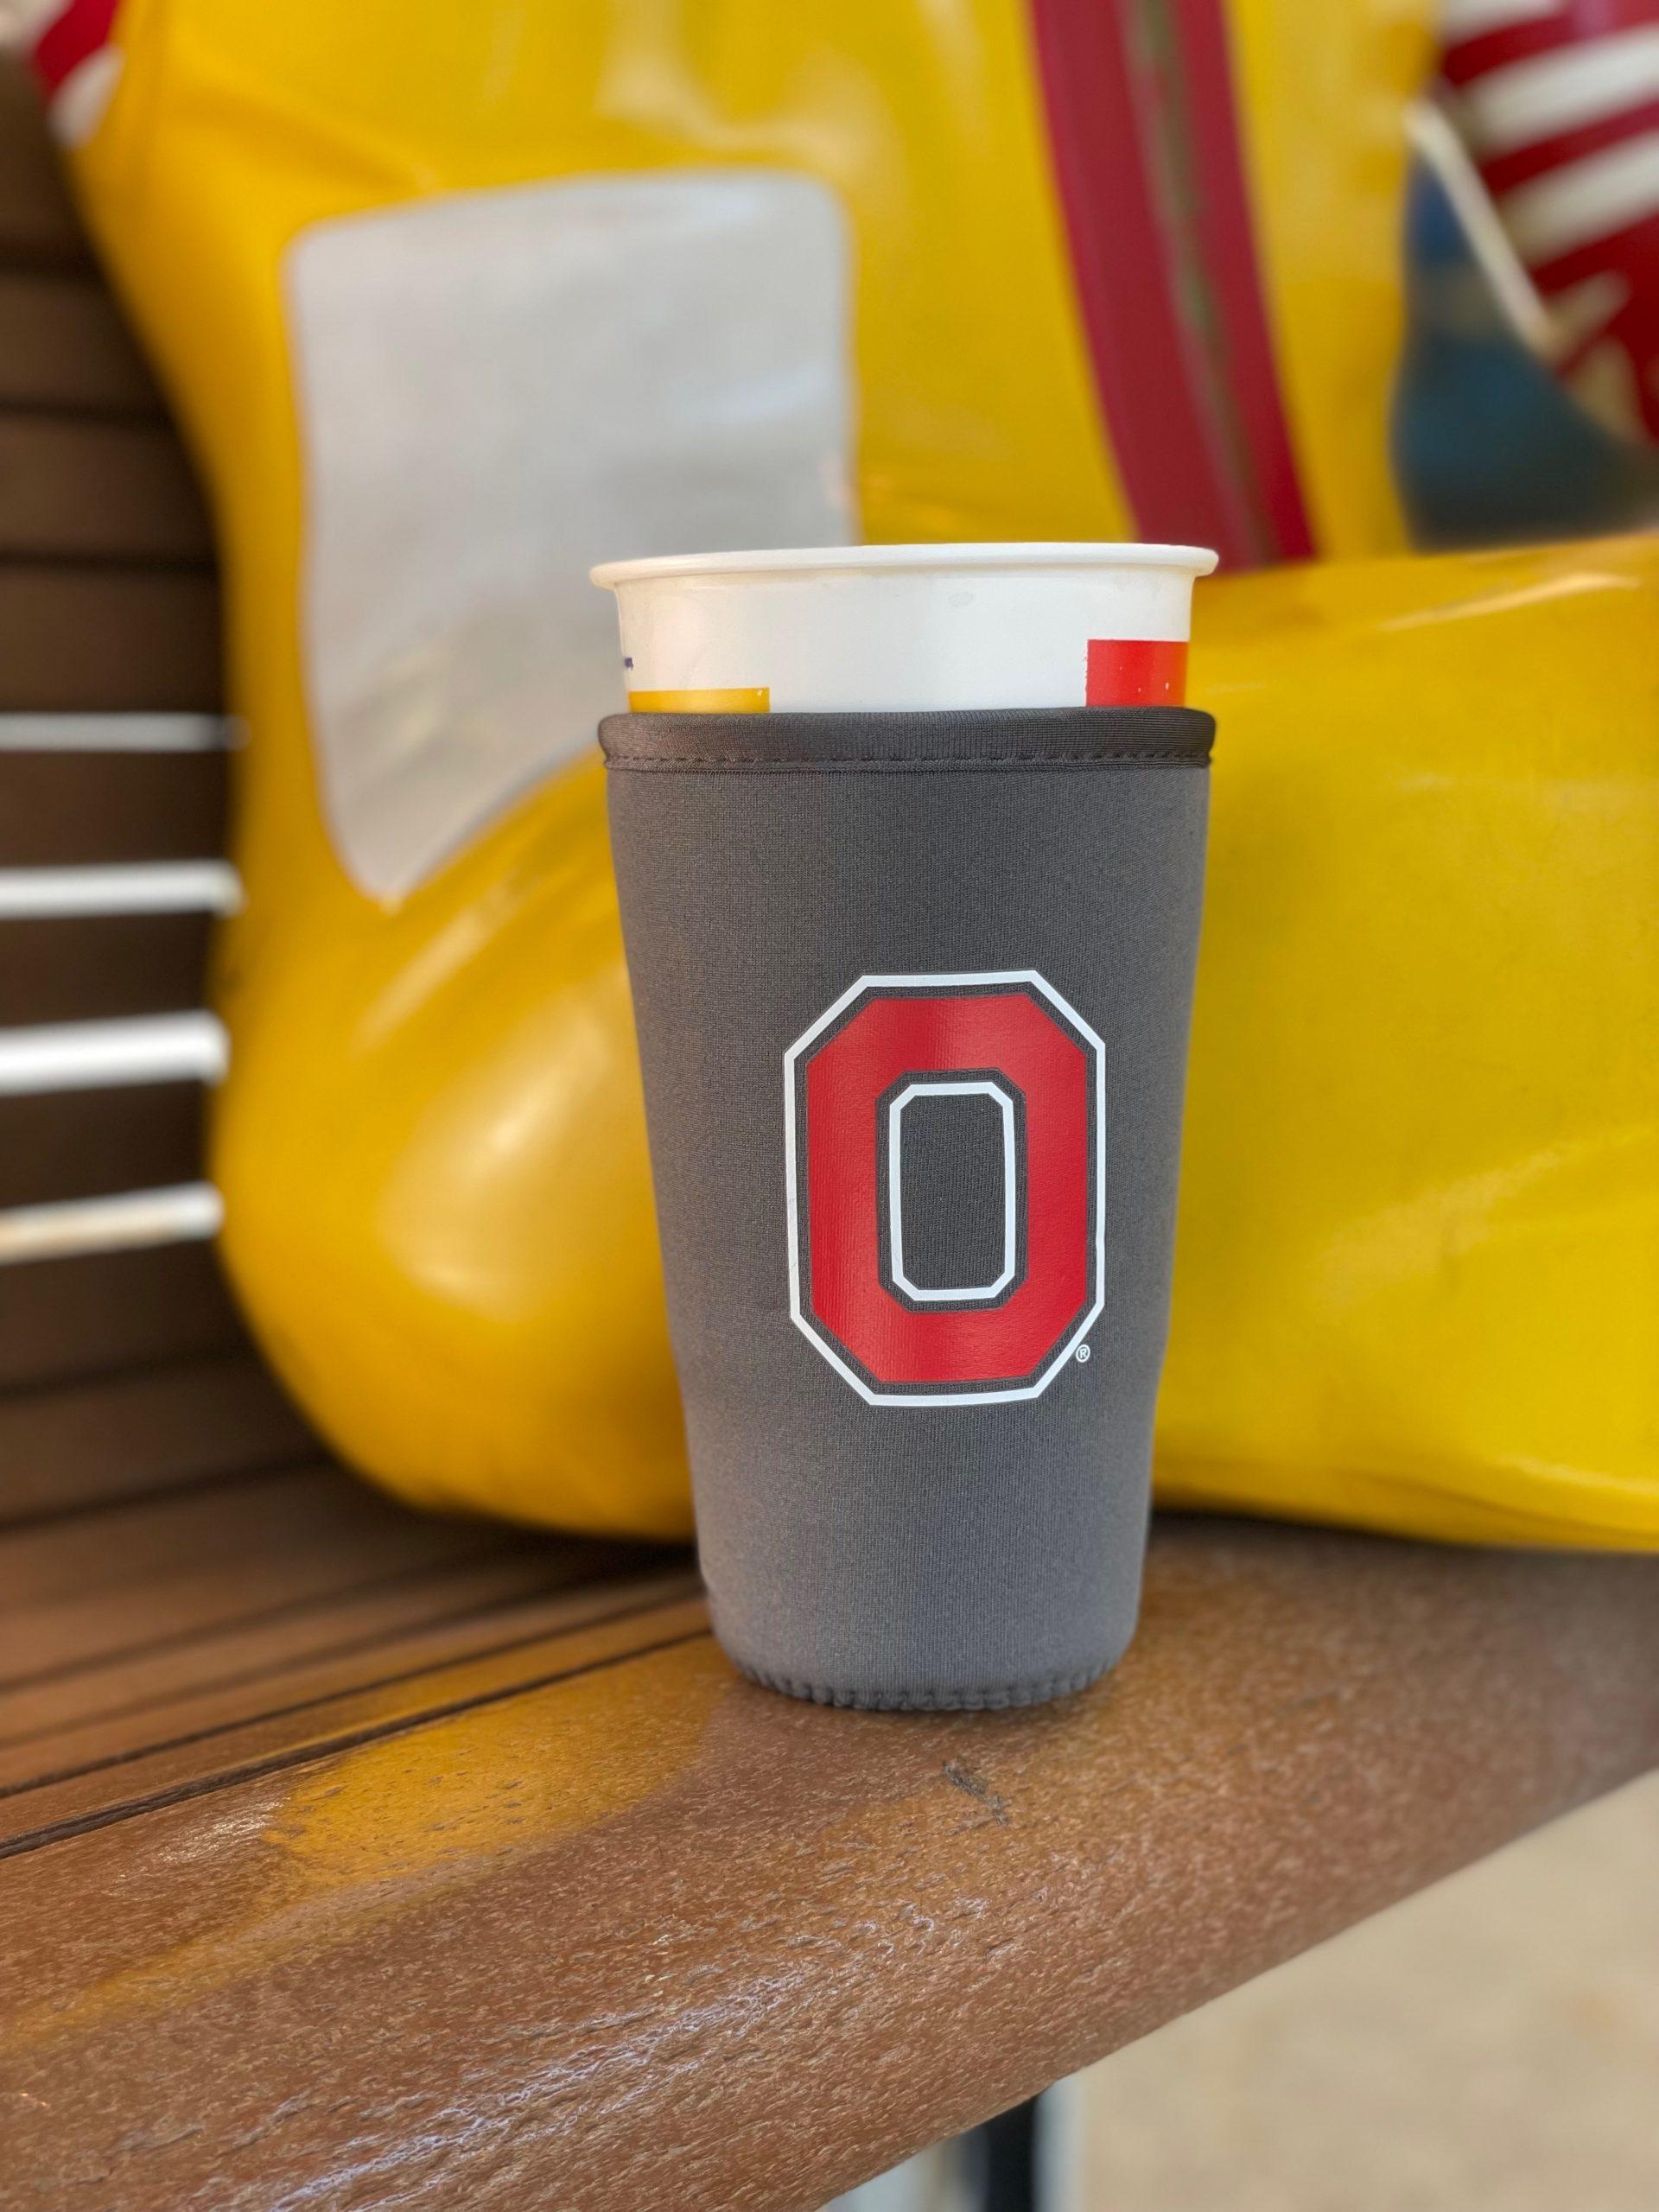 McDonald's - That's right Ohio football fans, you can Share a Coke® and  celebrate with cups for our hometown Ohio State Buckeyes! Share a Coke w/  your FanMates at McDonald's®! You could